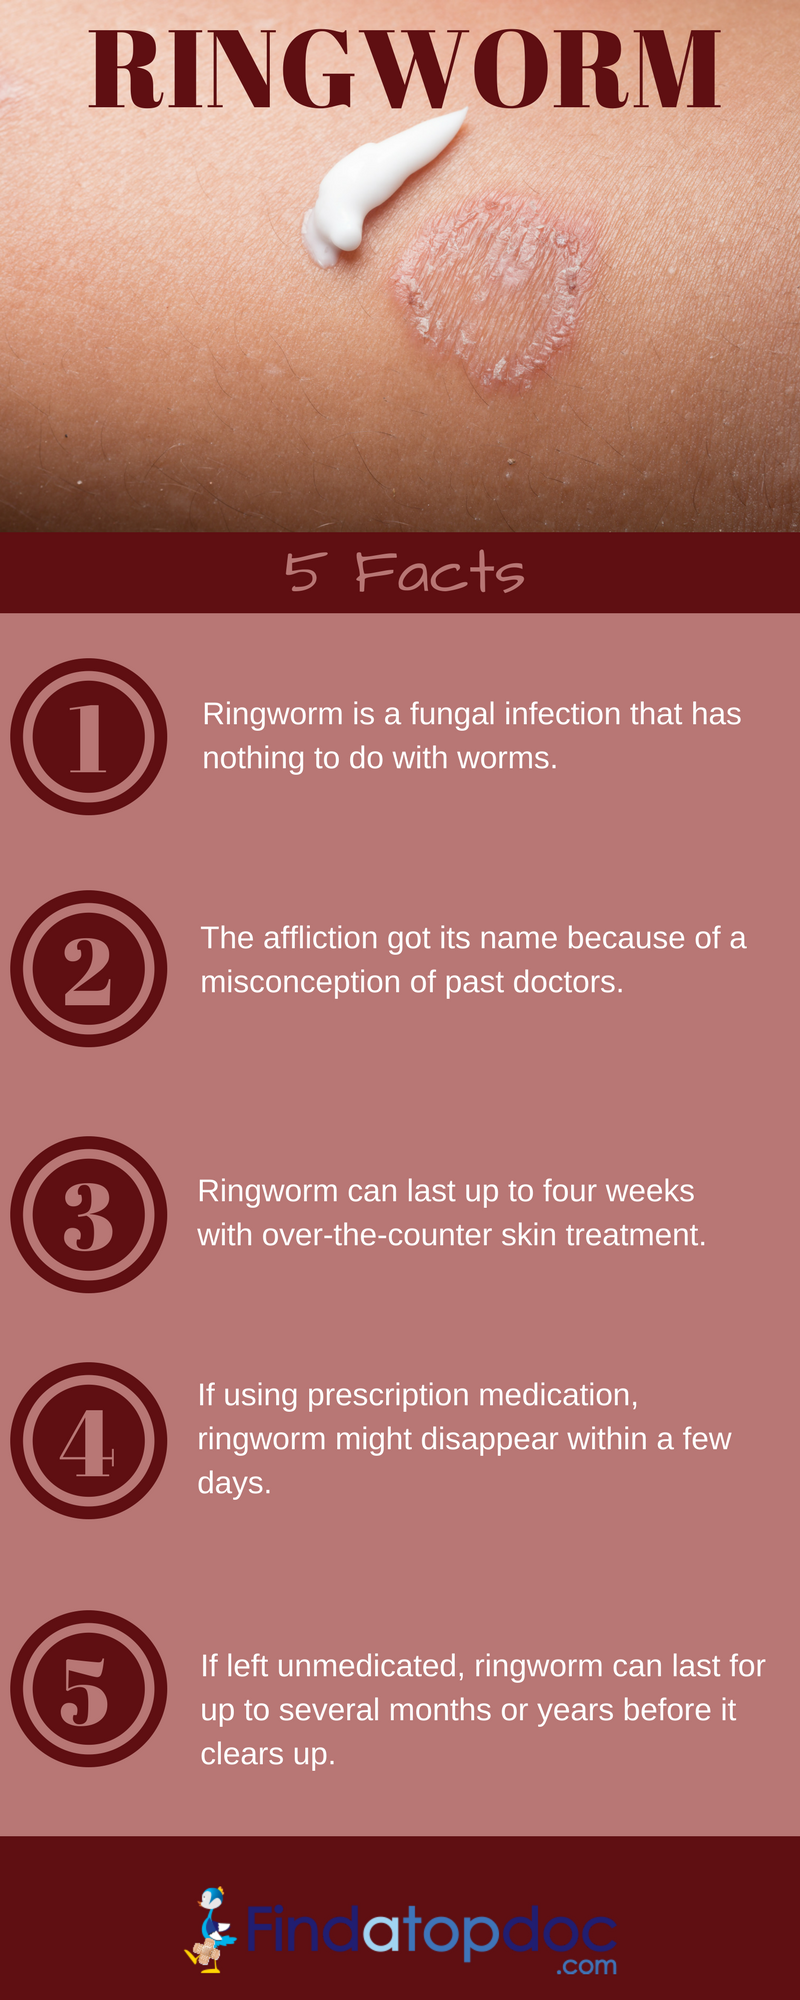 what is the best medication for ringworm infection